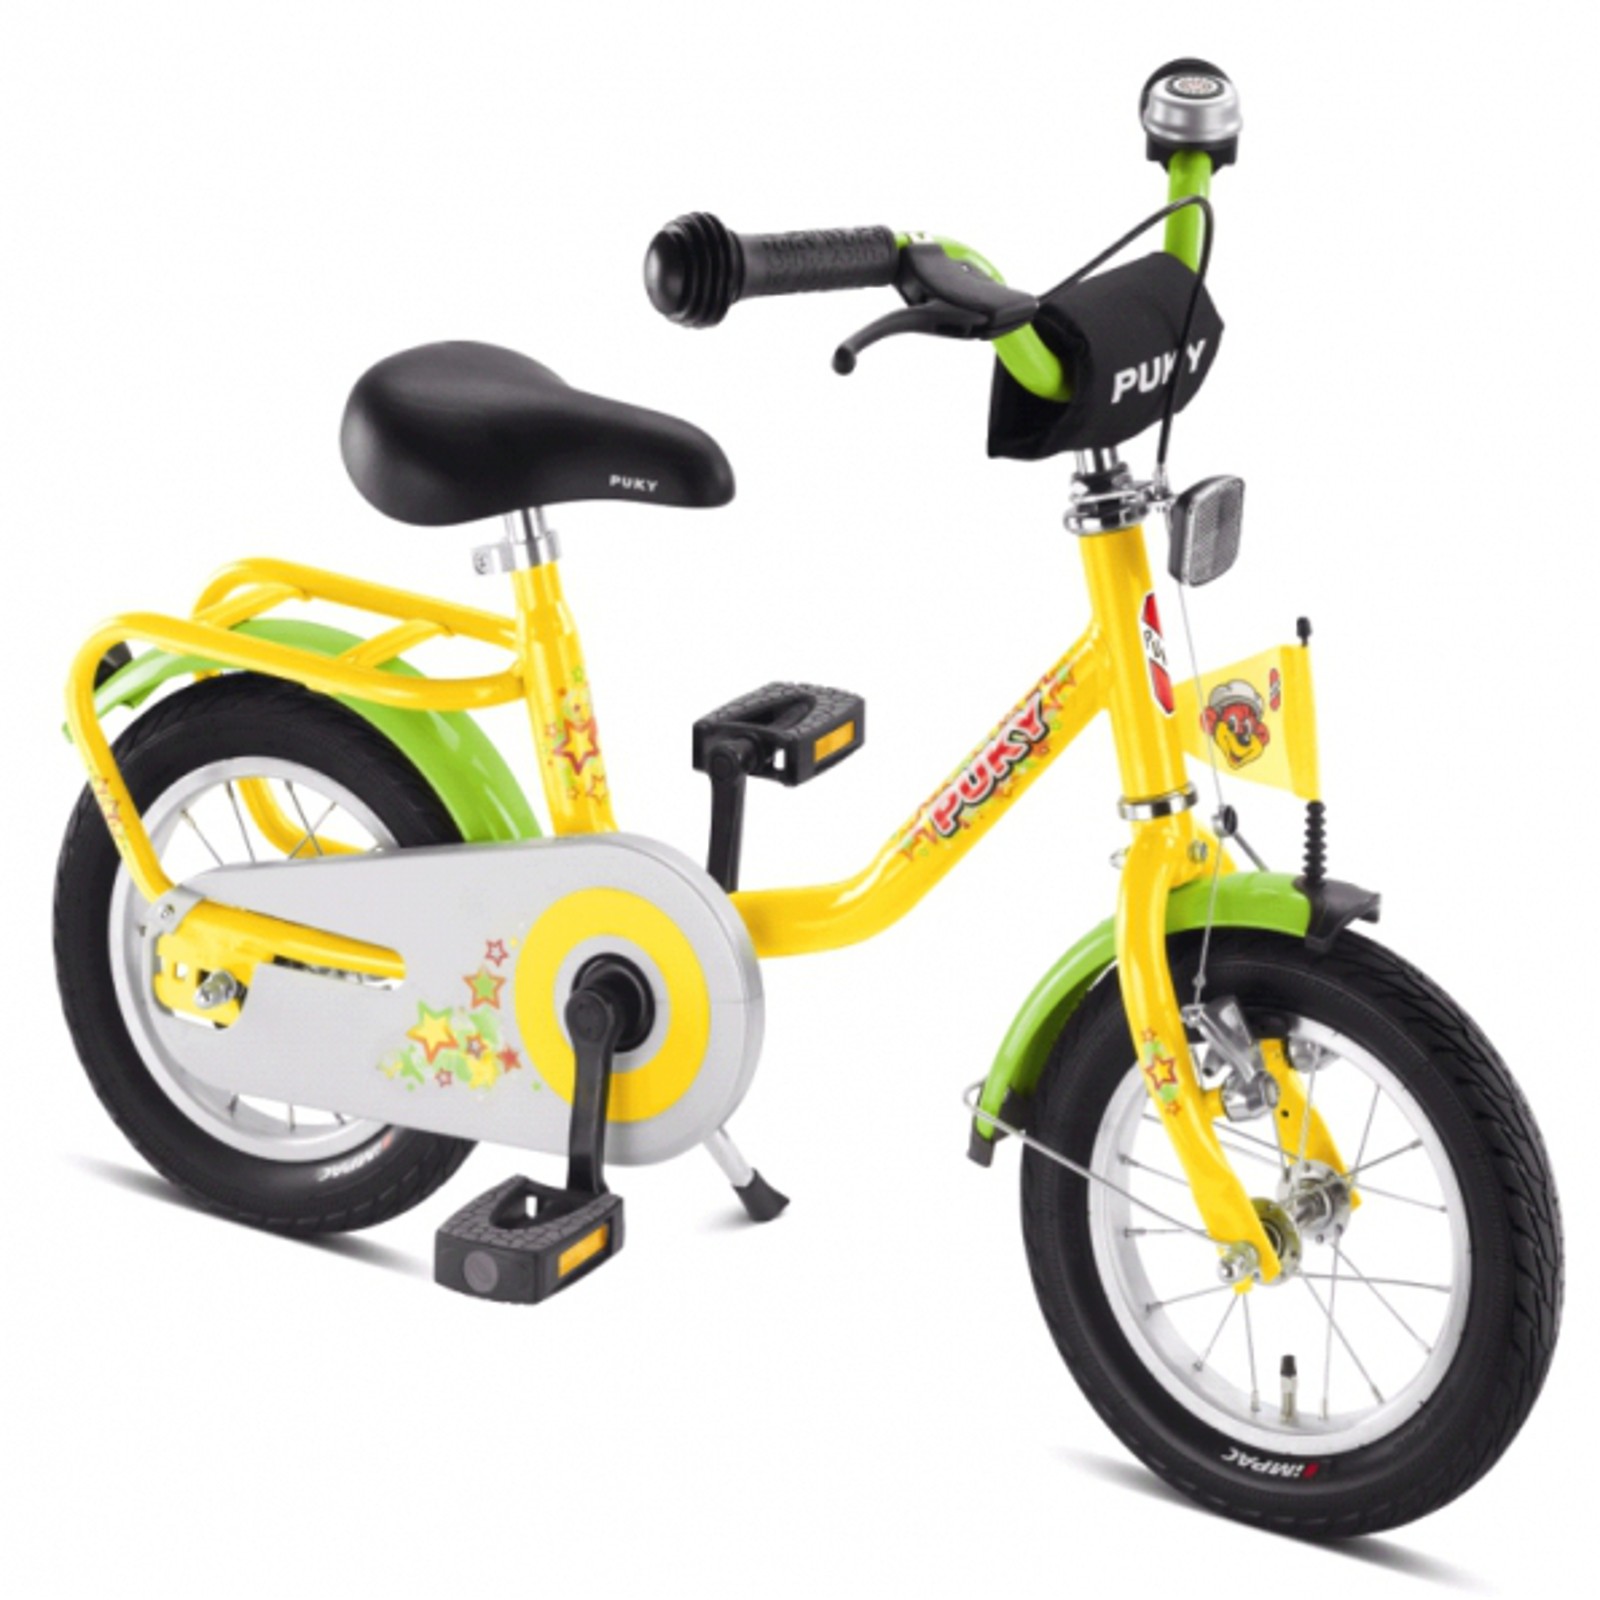 PUKY Z2 children's bike 12 inches buy with 16 customer